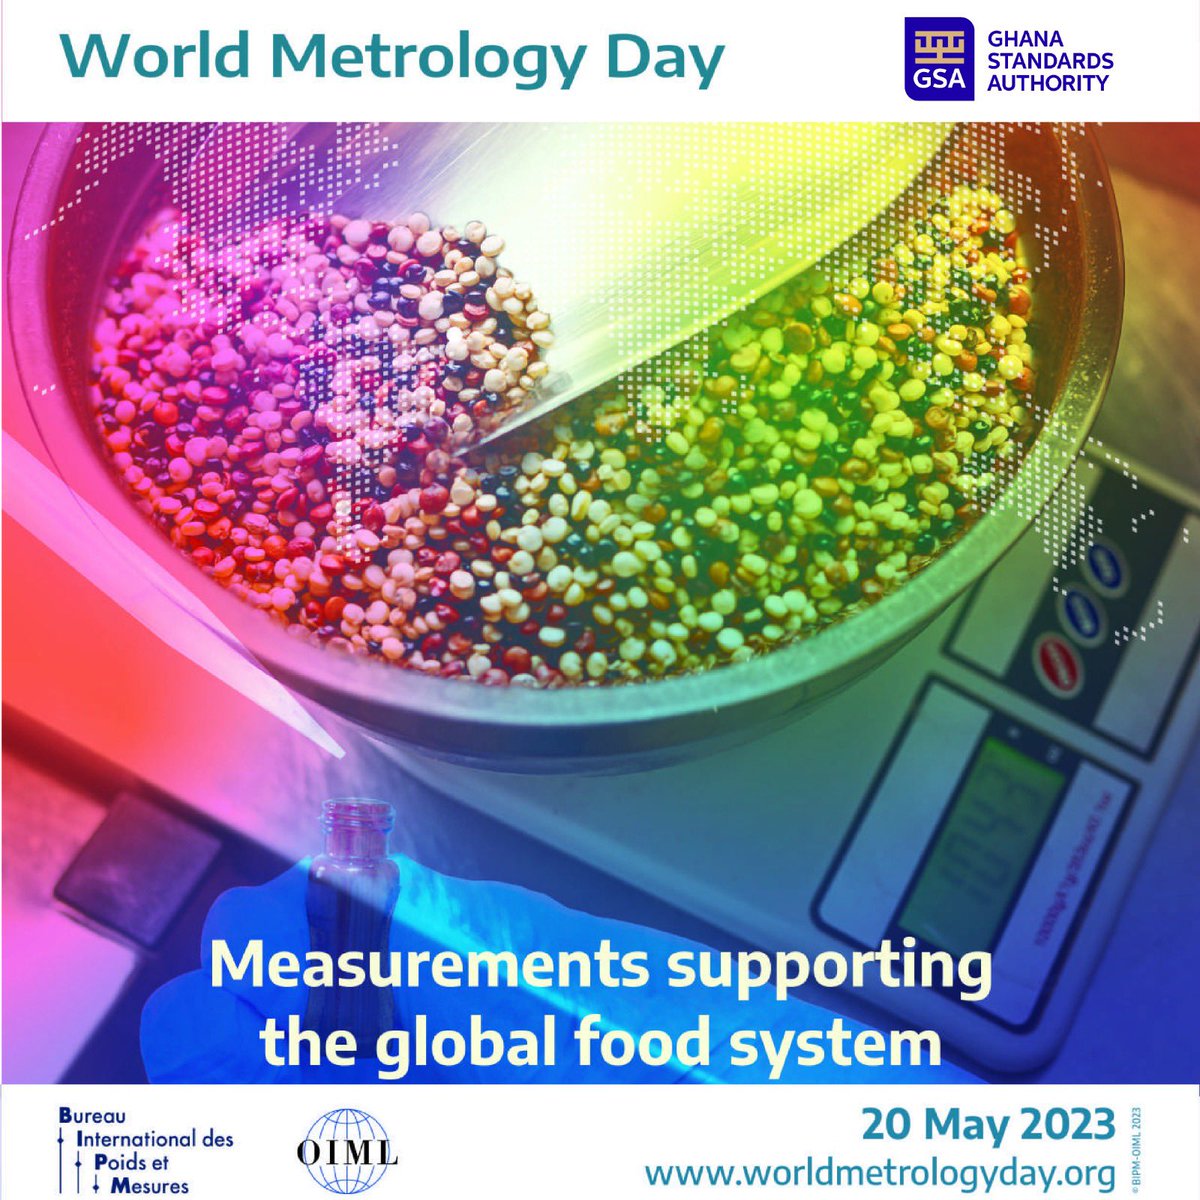 Happy World Metrology Day!  We celebrate the critical role that measurements play in supporting the global food system. Let's continue to prioritize accuracy and precision in our measurements for a sustainable future.
#WorldMetrologyDay #GlobalFoodSystem #MeasurementsMatter 🌍🌾